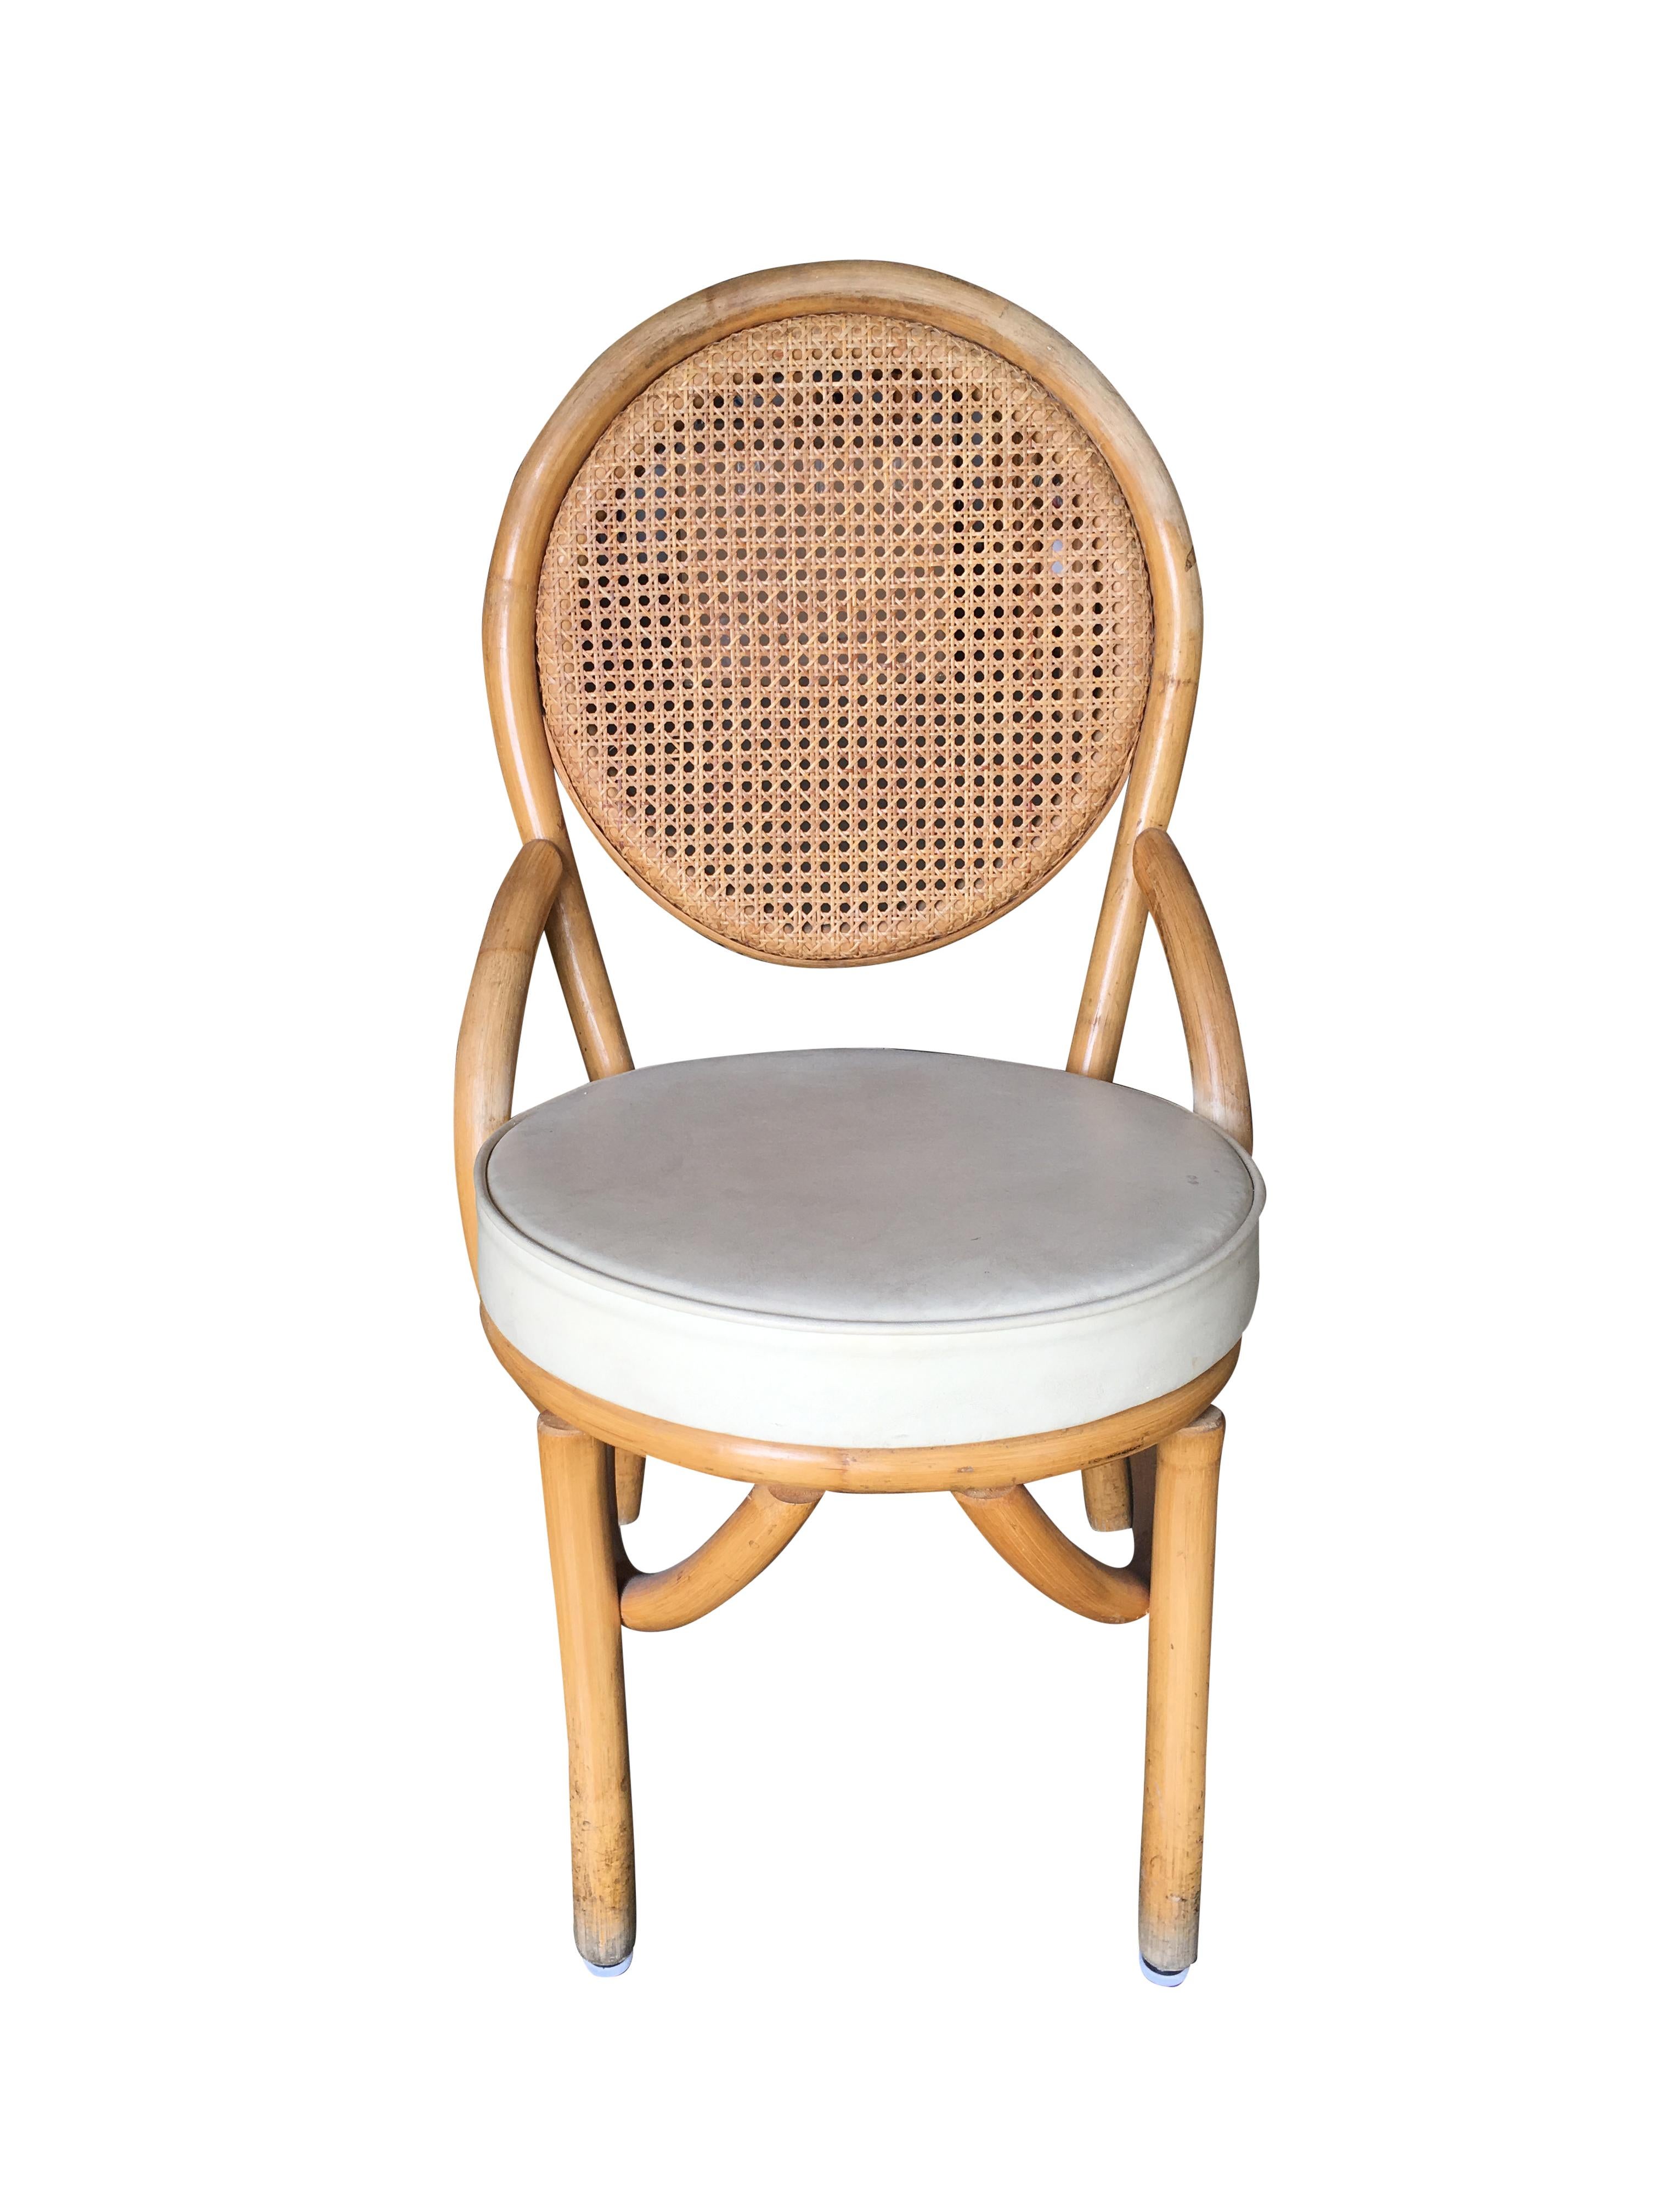 chairs with rattan seats